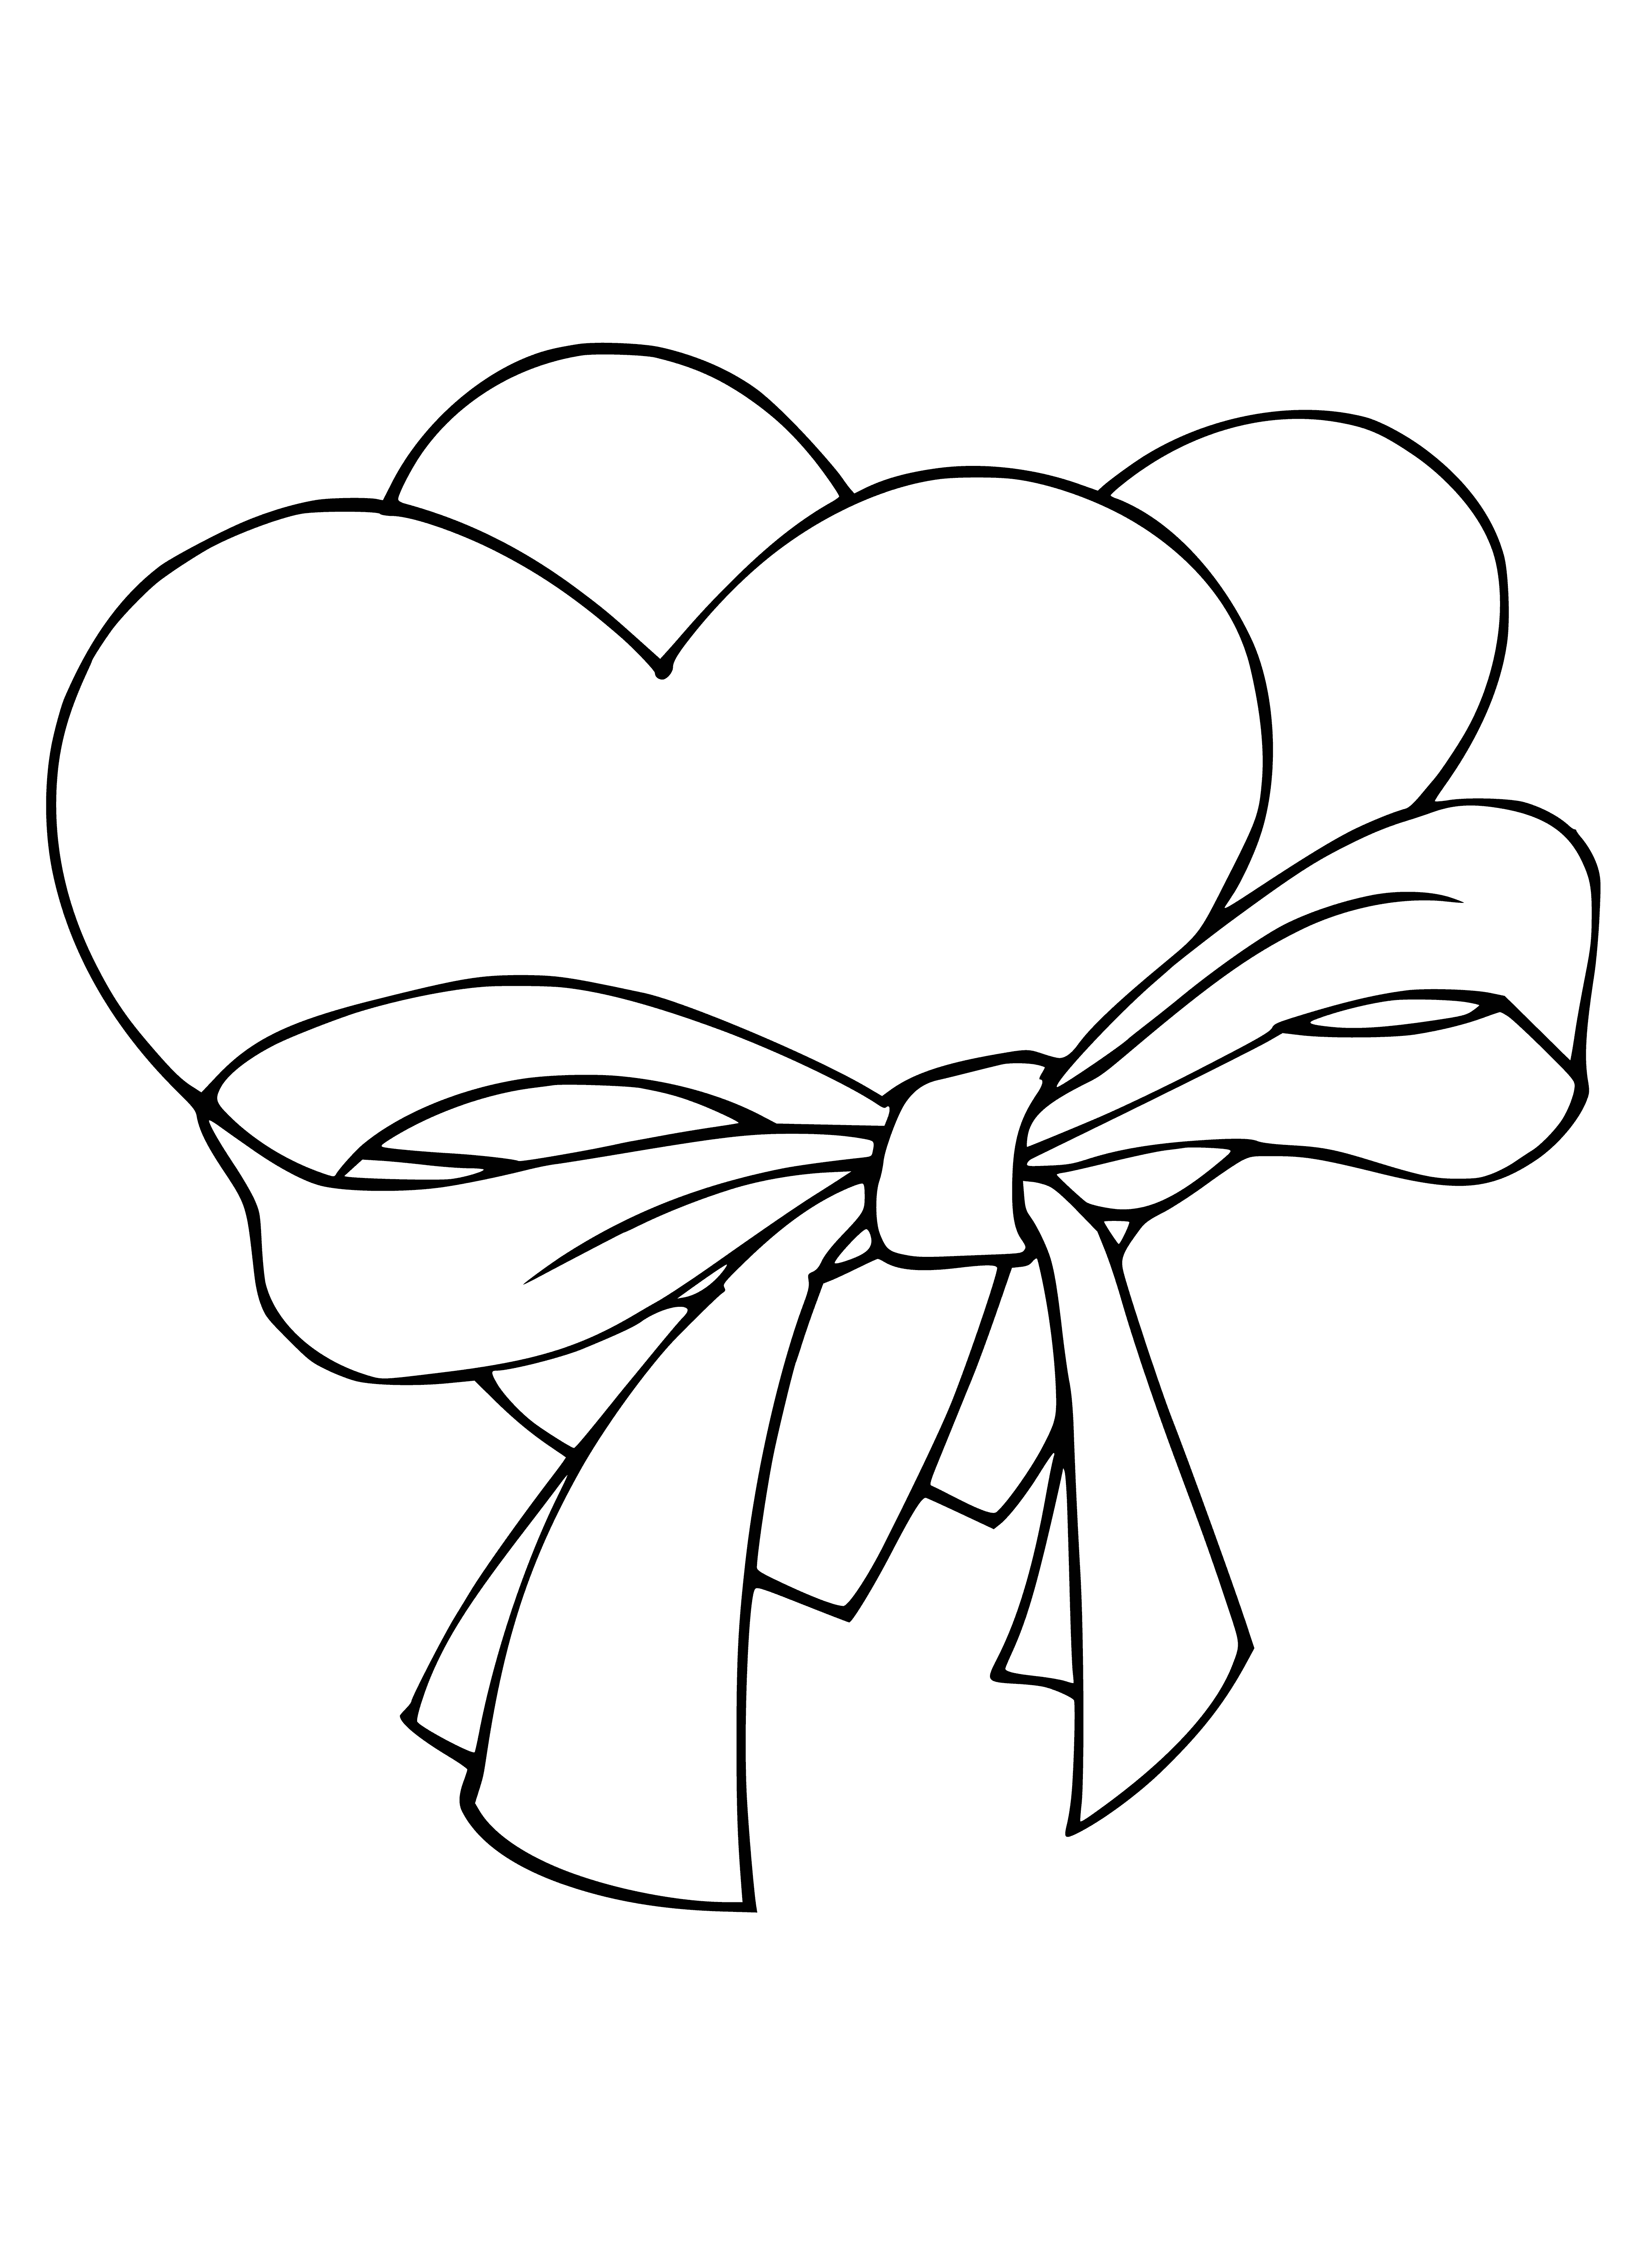 coloring page: Two hearts, slightly different sizes, pierced by an arrow, show the beauty and tragedy of love on Valentine's Day.